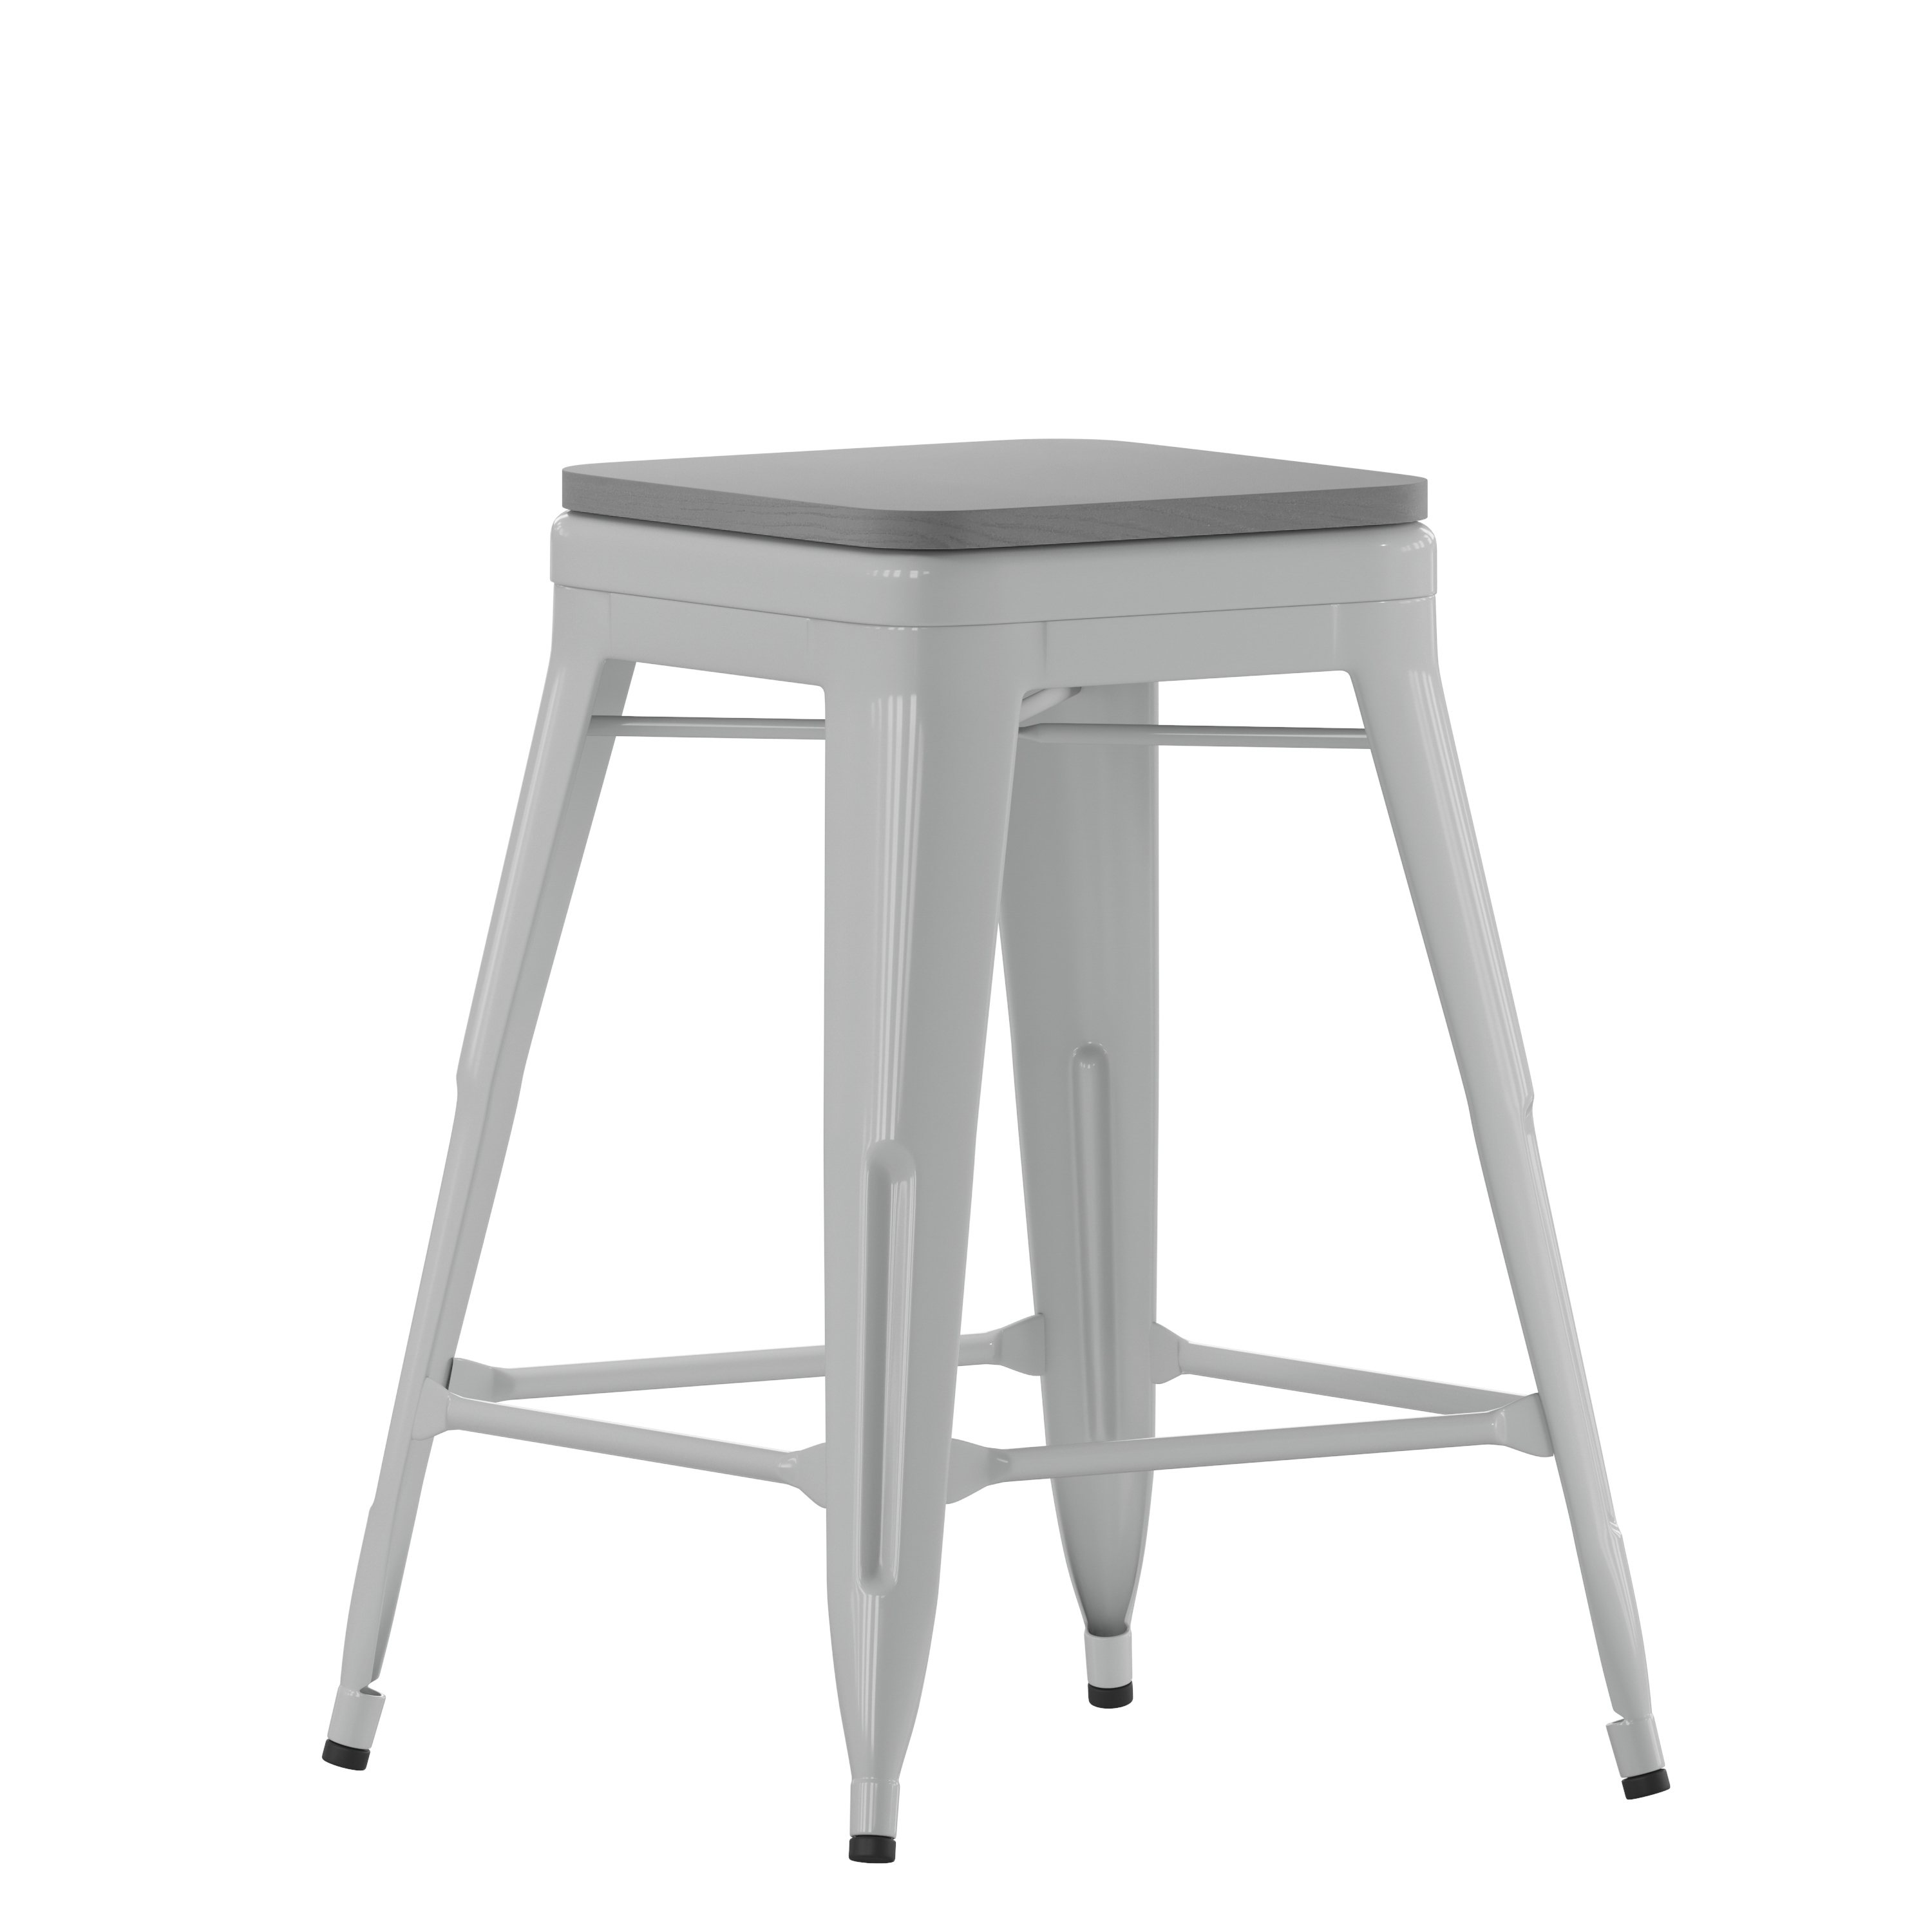 Flash Furniture 4-ET-31320-24-SV-R-PL2G-GG Cierra 24" Backless Silver Metal Indoor Counter Height Stool with Gray All-Weather Poly Resin Seat, Set of 4